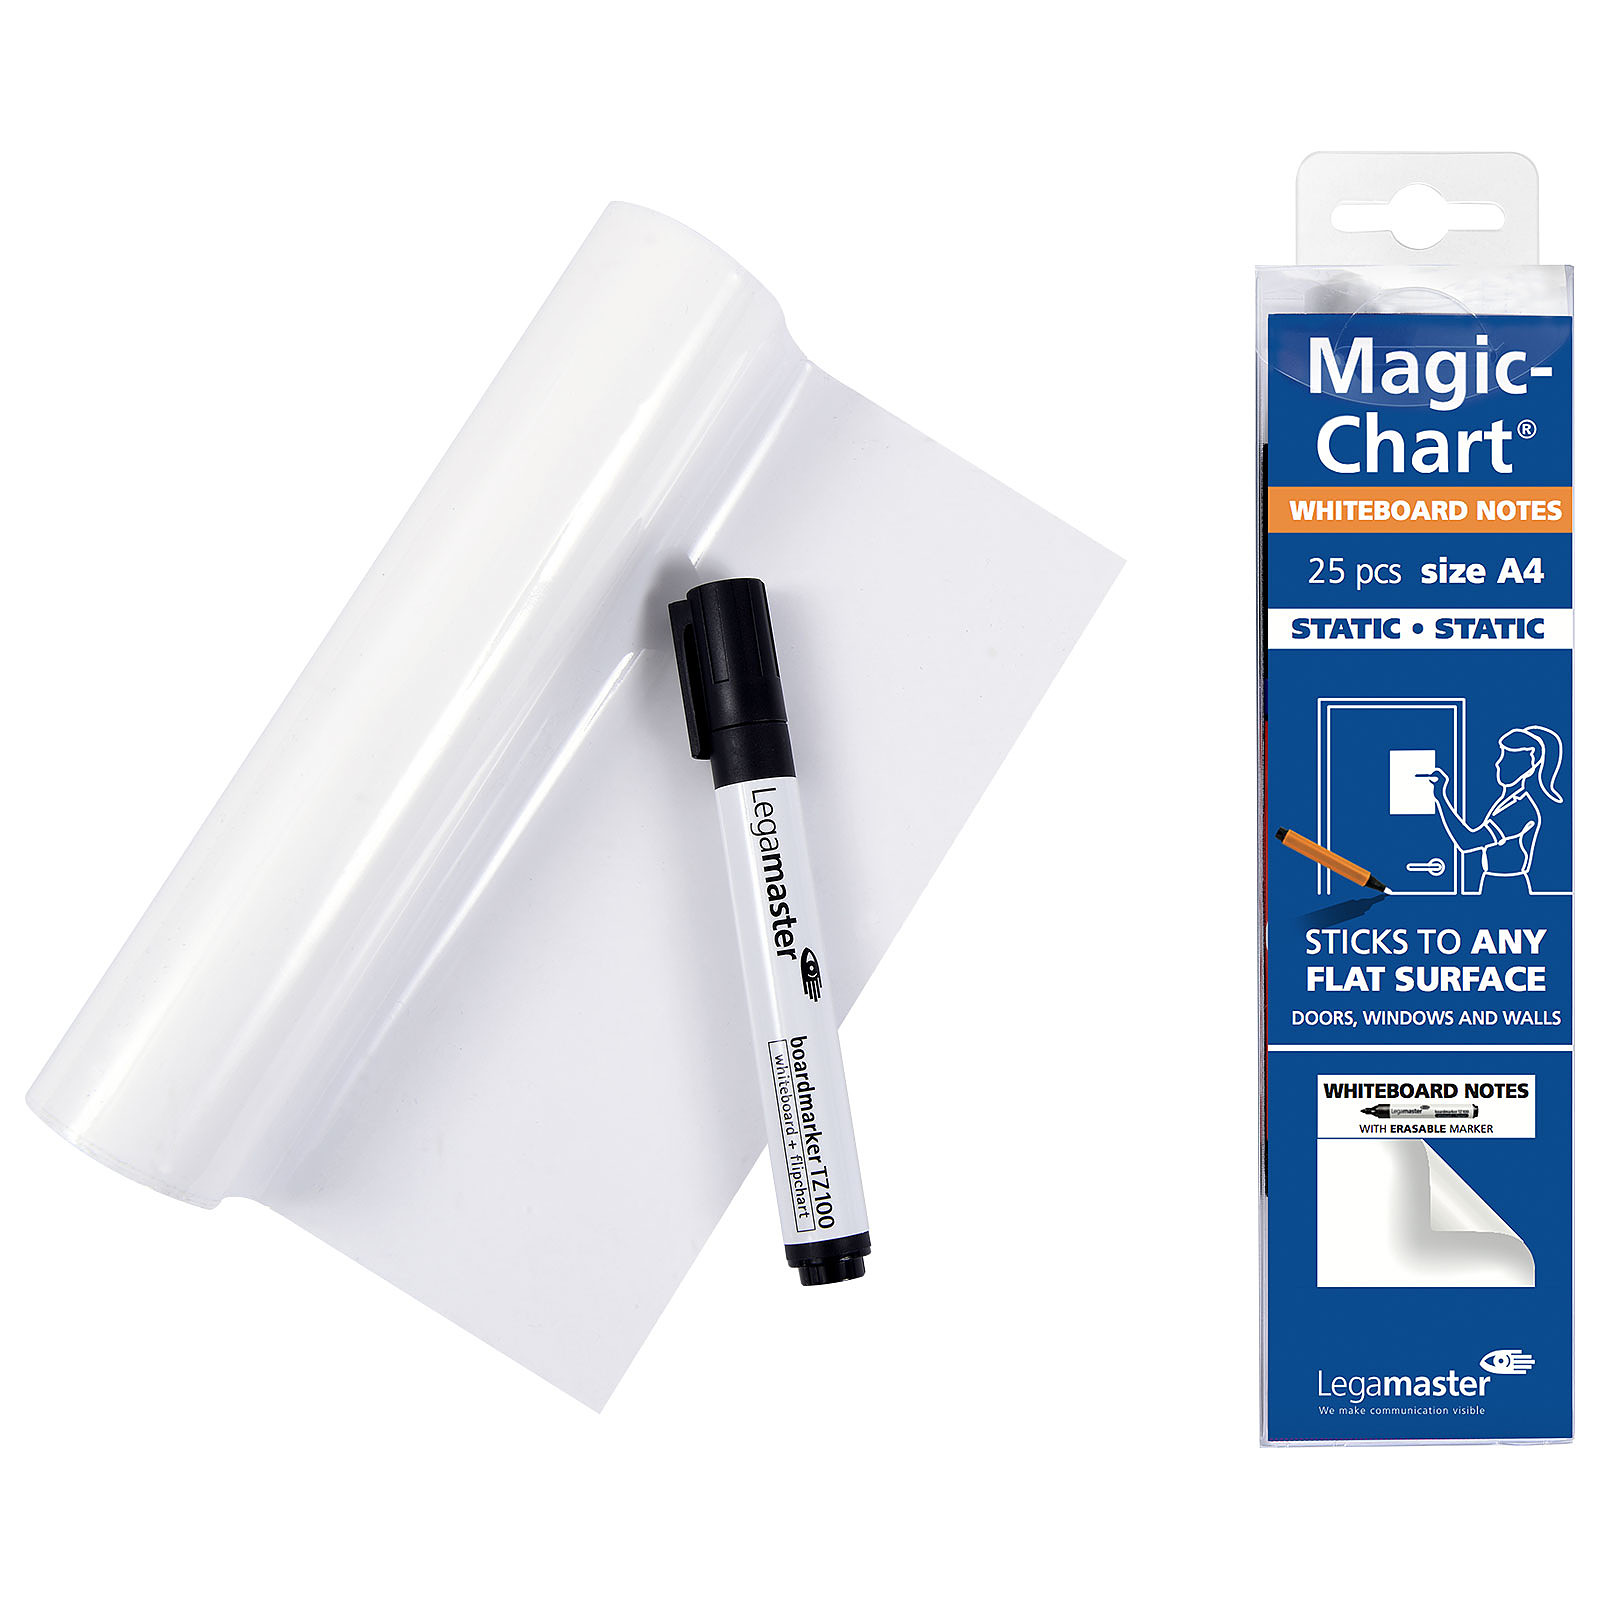 Legamaster Magic-Chart Whiteboard Notes A4 - Tableau blanc et paperboard Legamaster